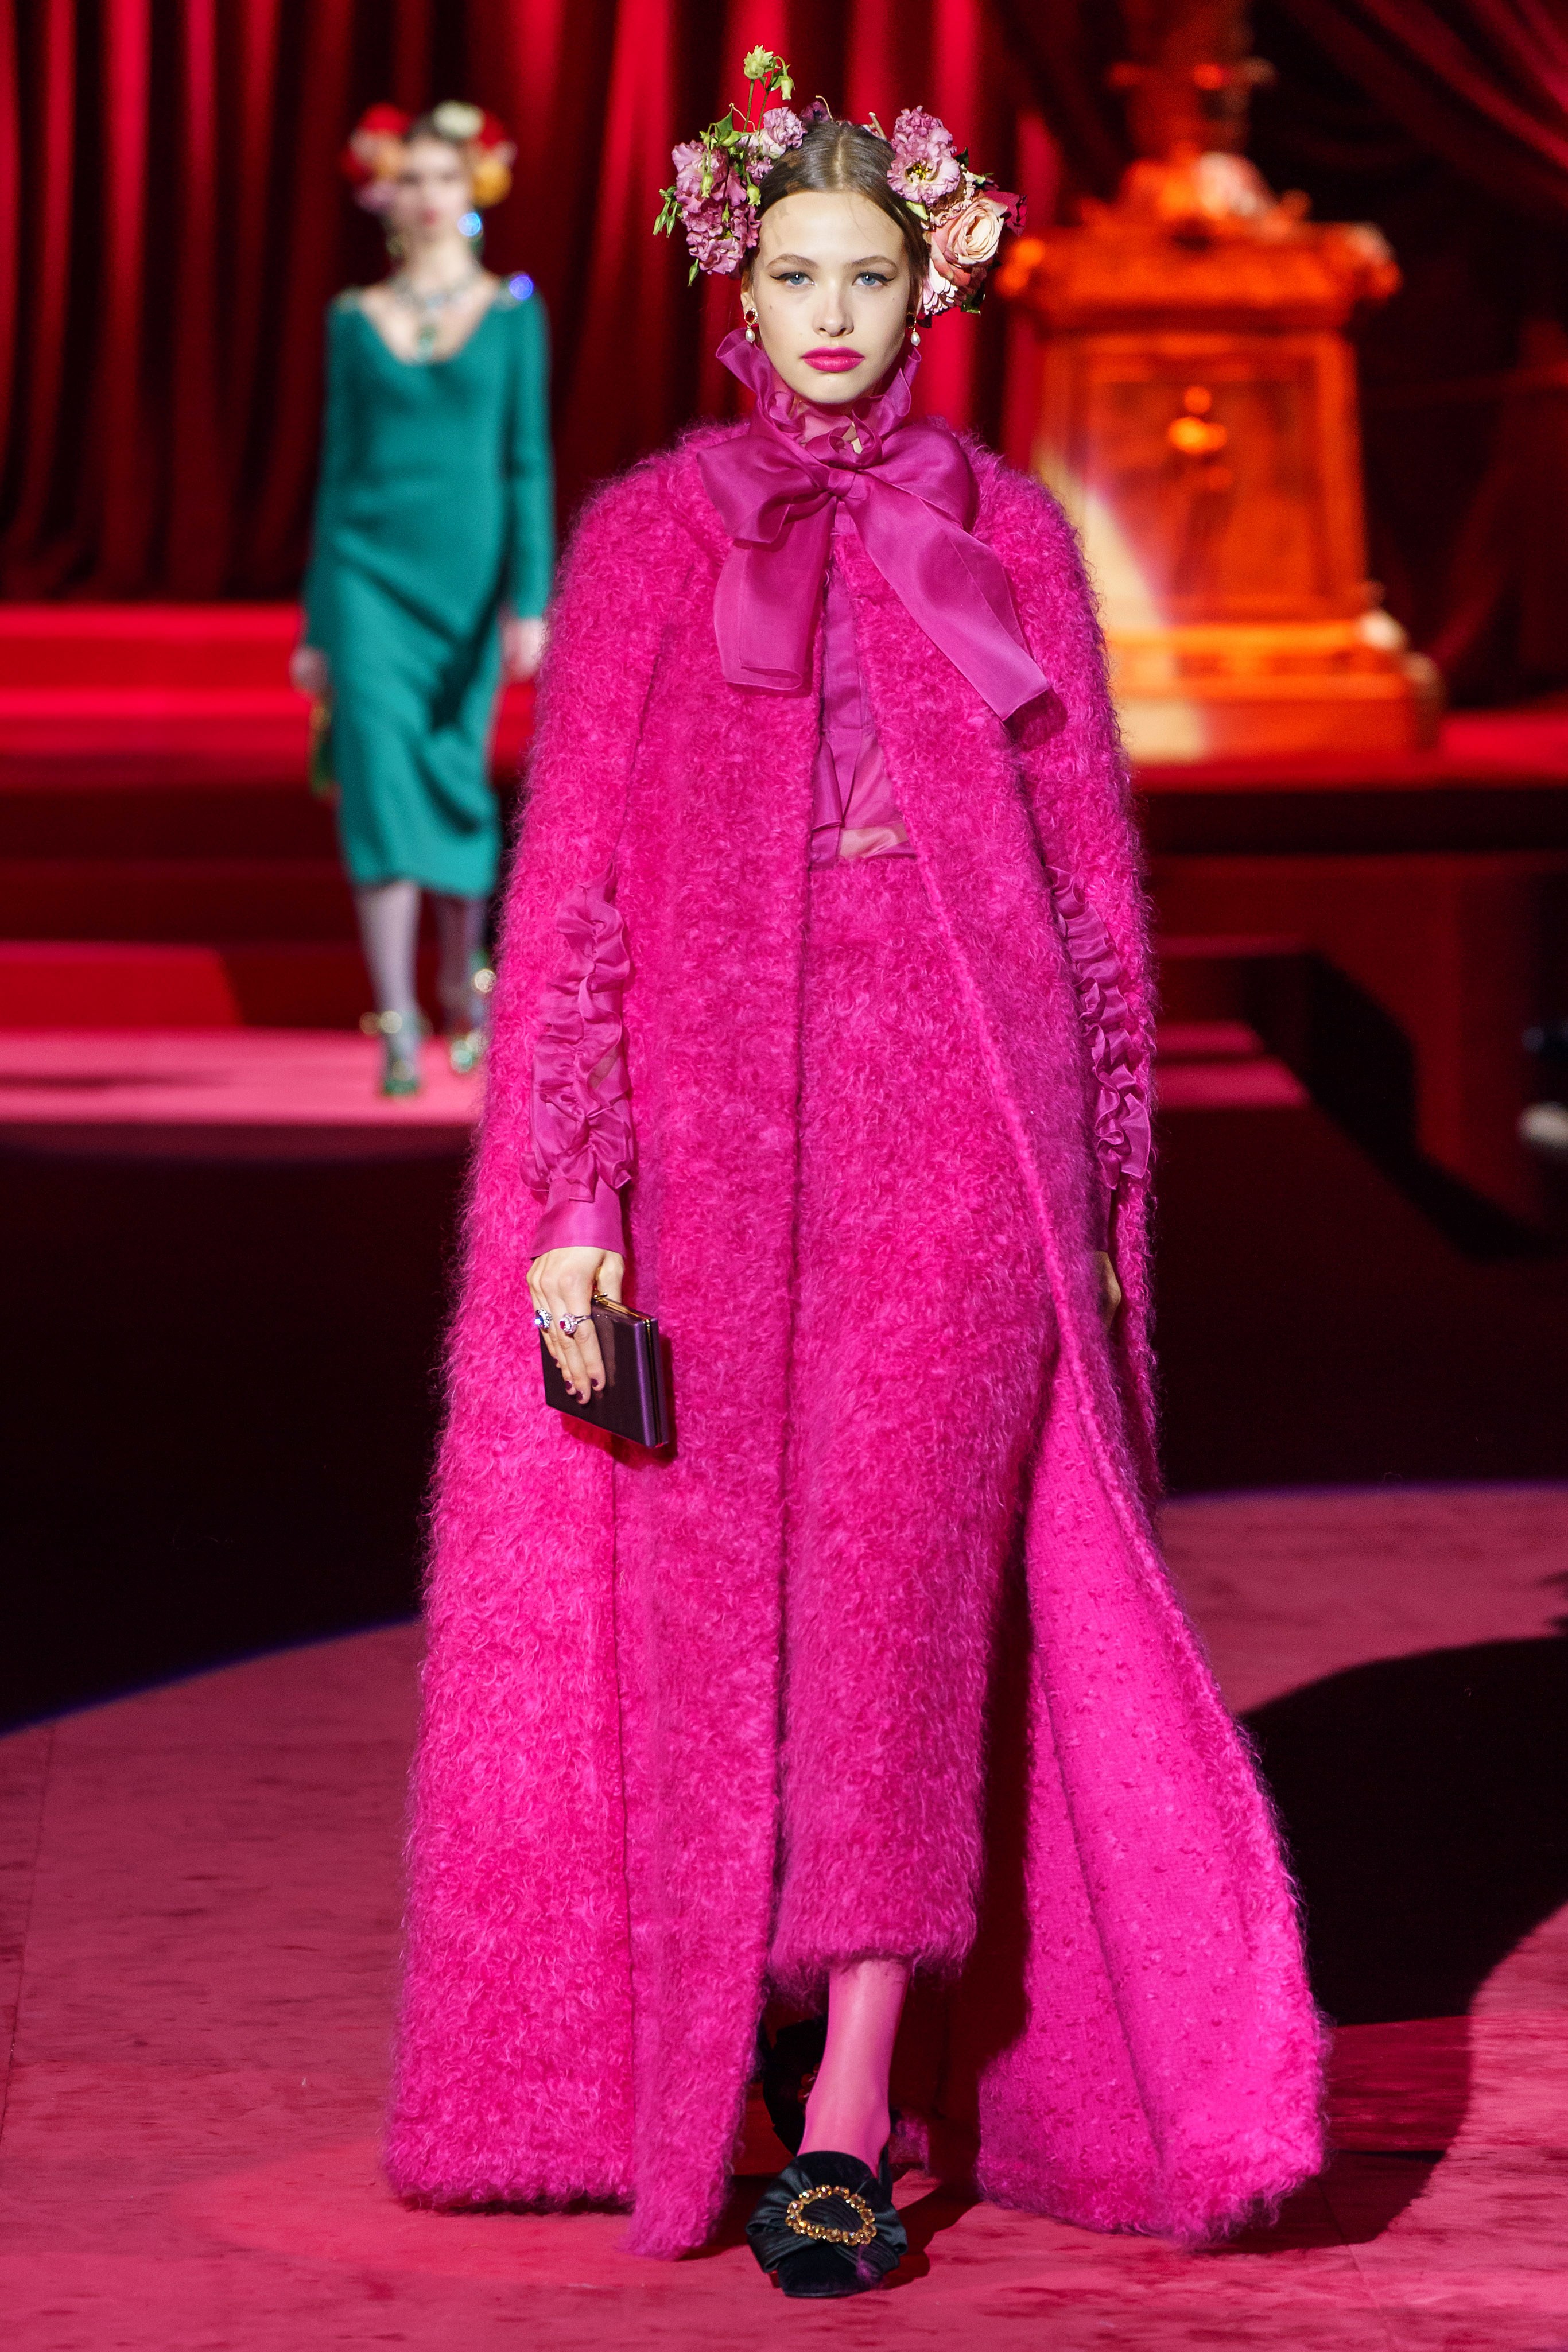 Dolce Gabbana Runway Look in Hot Pink Fall 2019 Collection